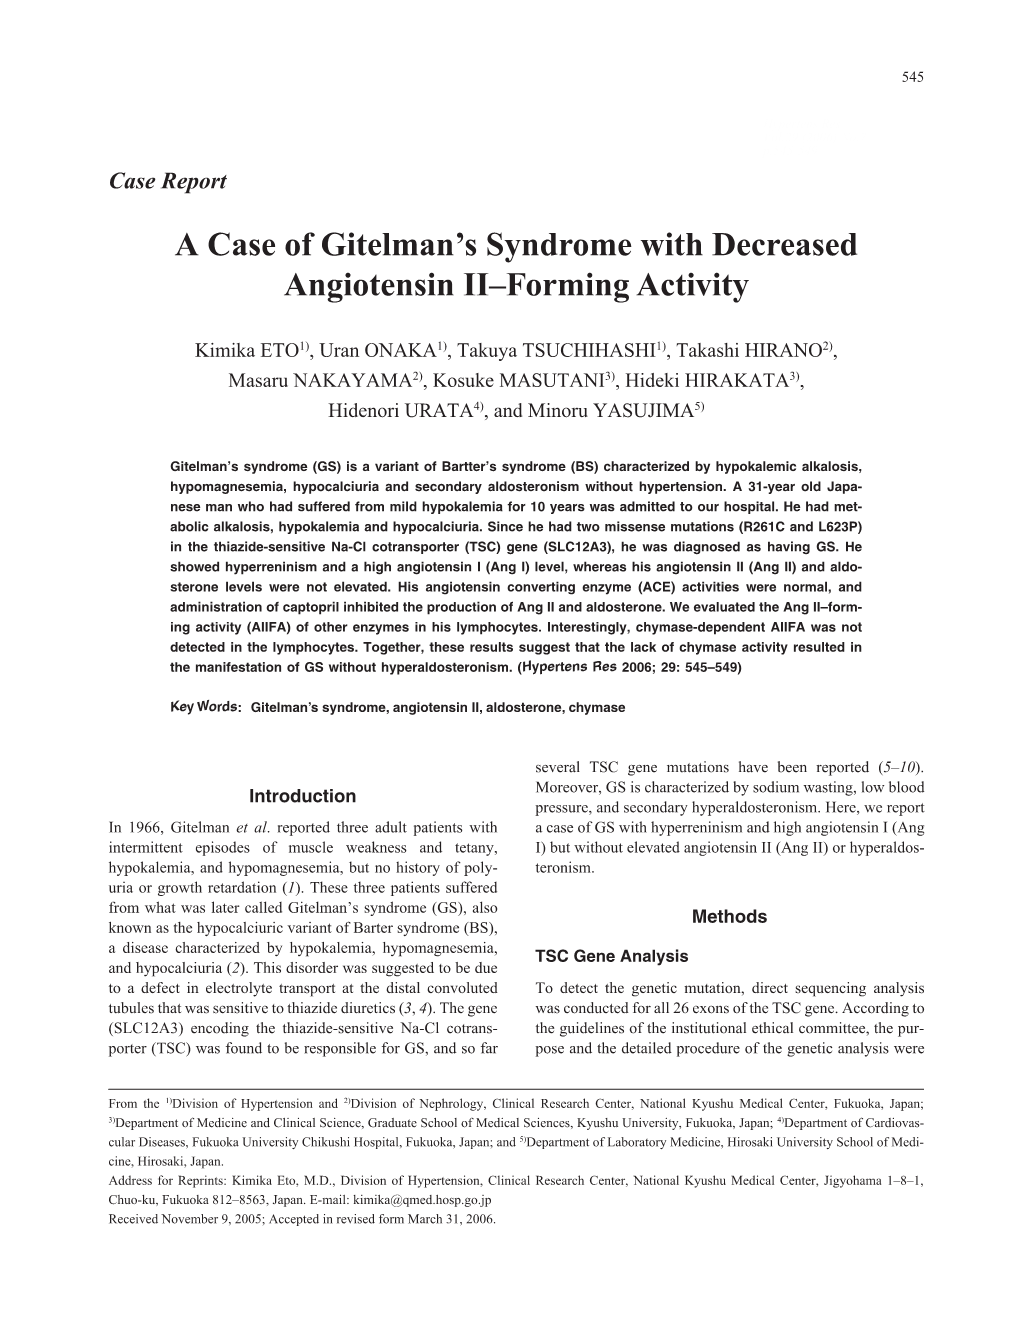 A Case of Gitelman's Syndrome with Decreased Angiotensin II–Forming Activity